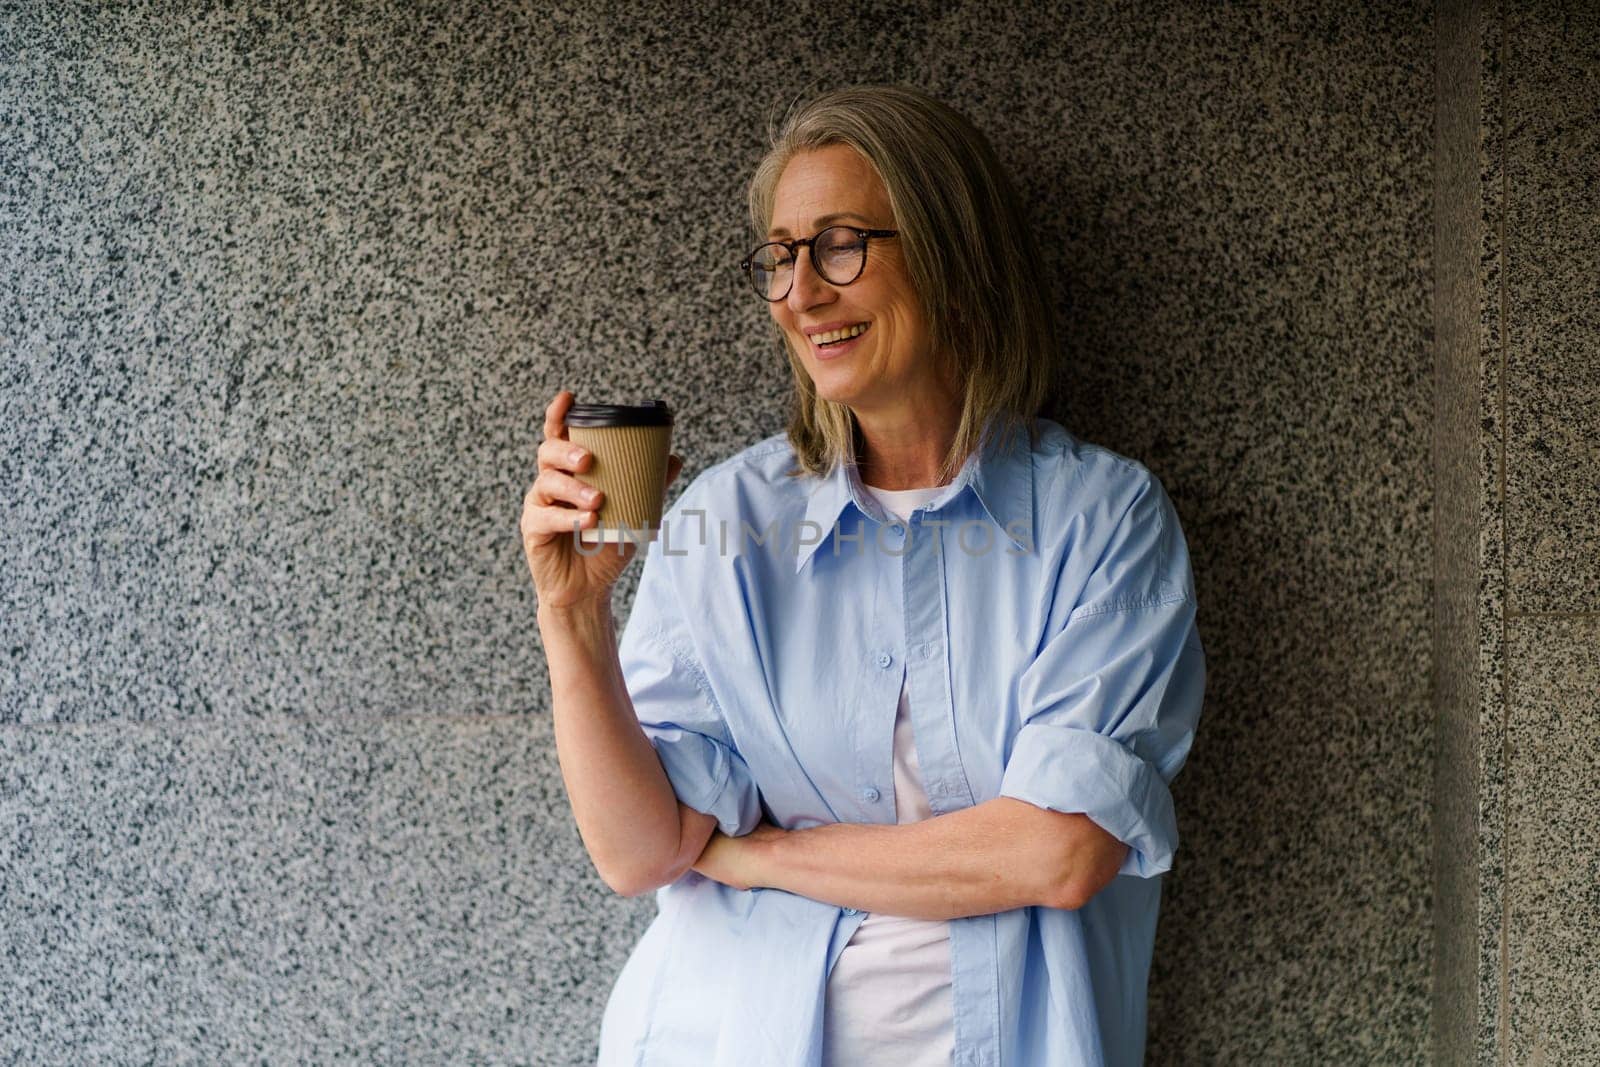 Woman With Glasses Holding Coffee Cup by LipikStockMedia